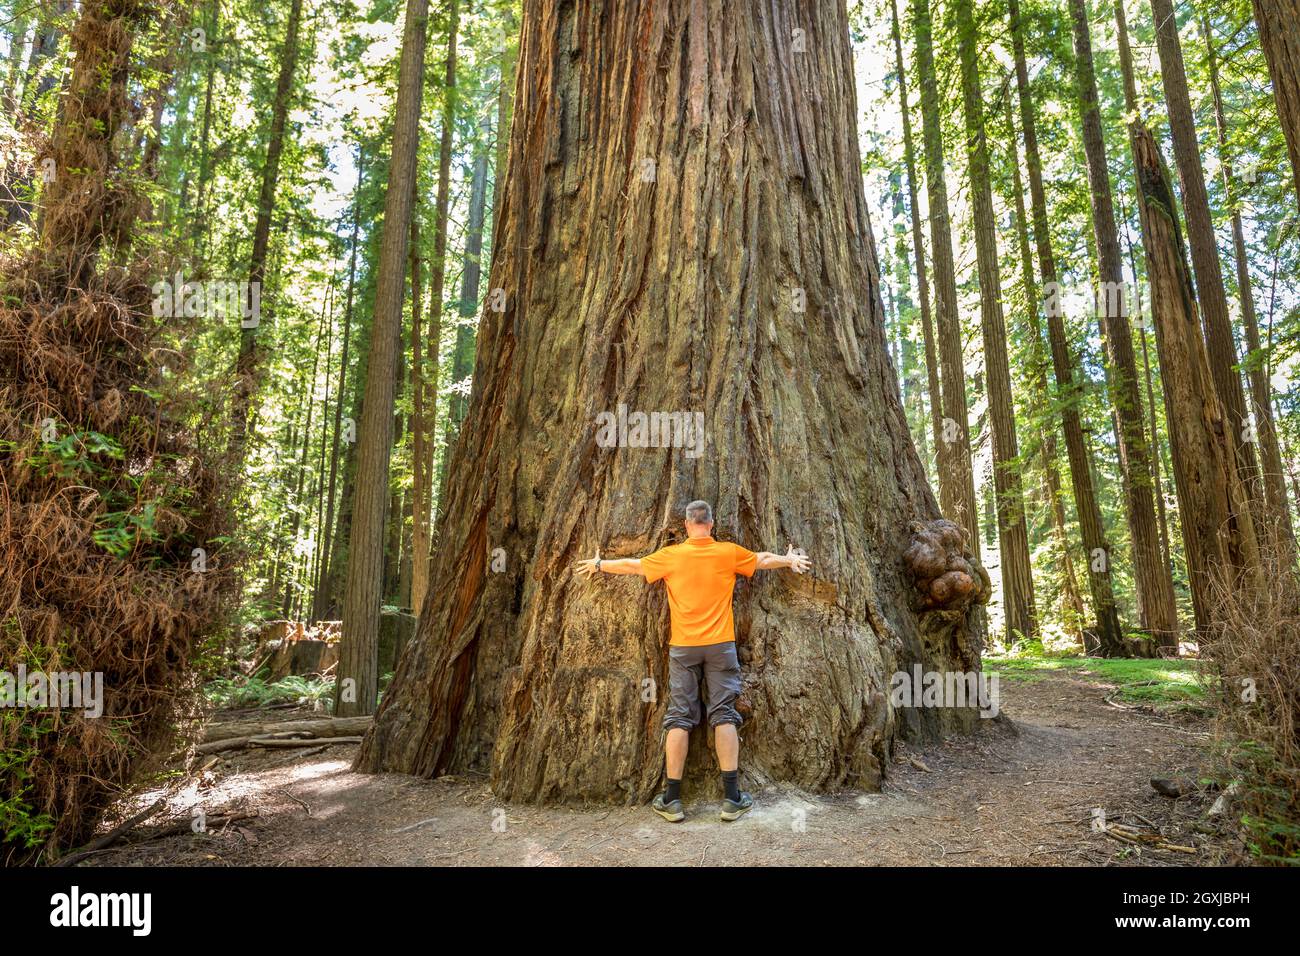 A man embracing a majestic Redwood tree in the Redwood National Park, California Stock Photo